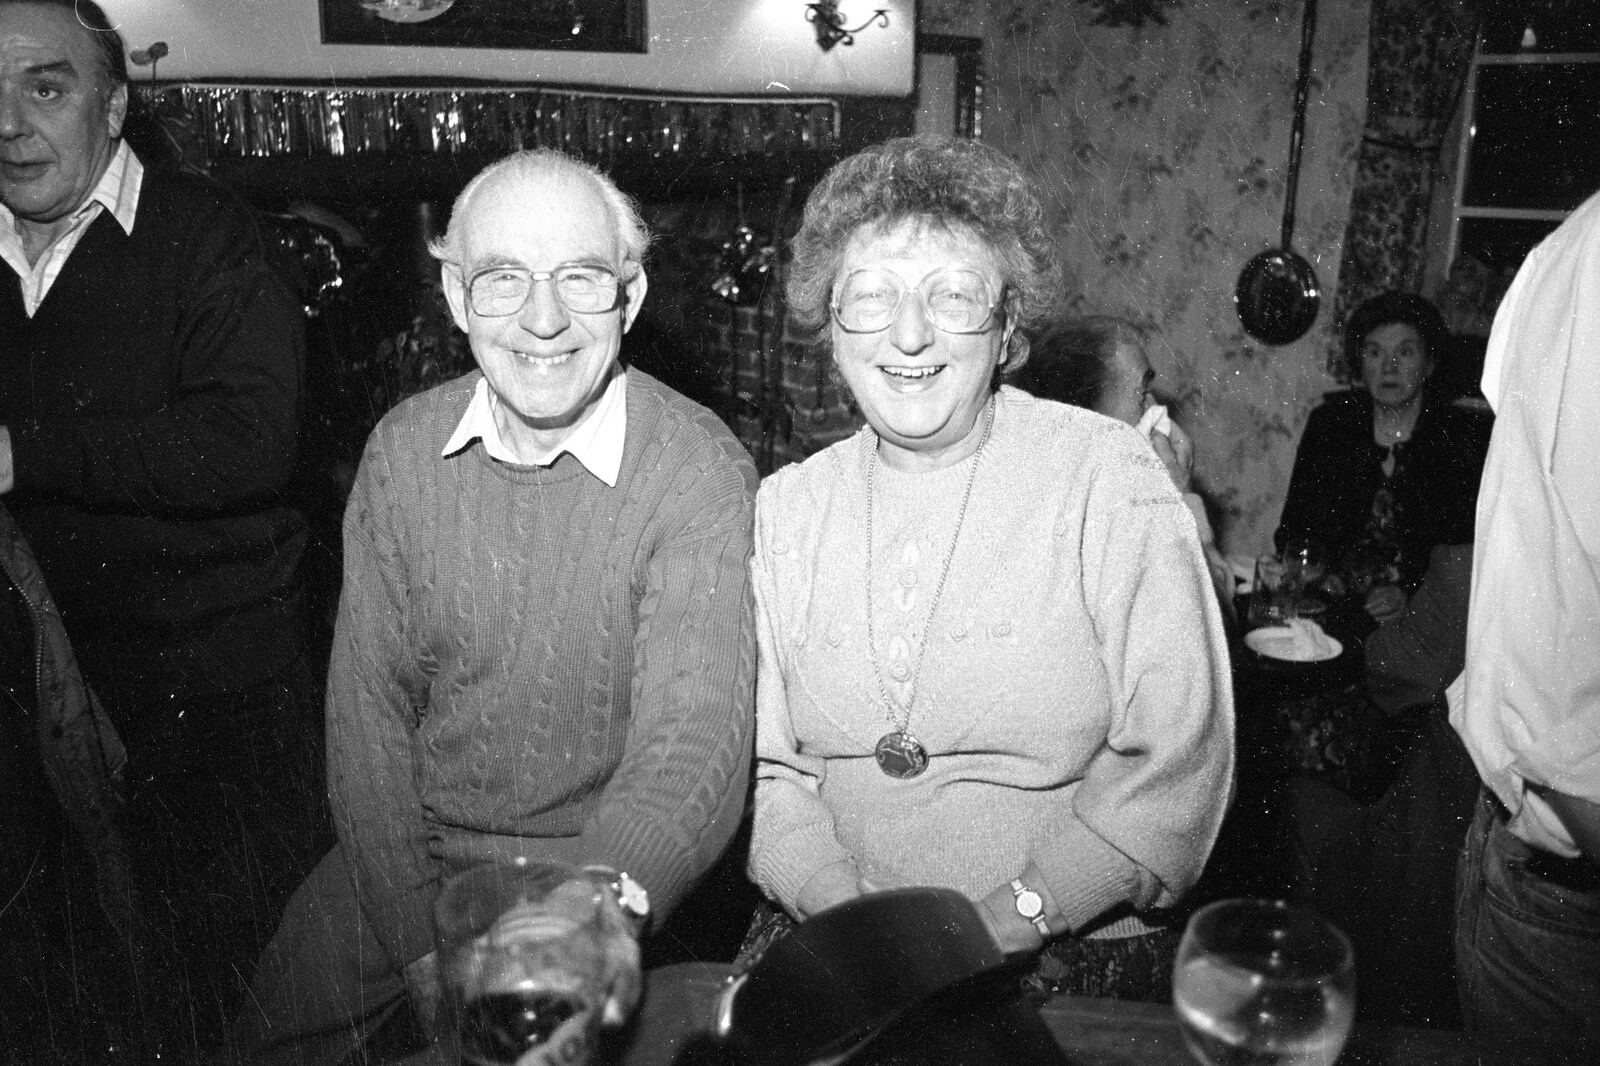 John and Arline from New Year's Eve at the Swan Inn, Brome, Suffolk - 31st December 1992